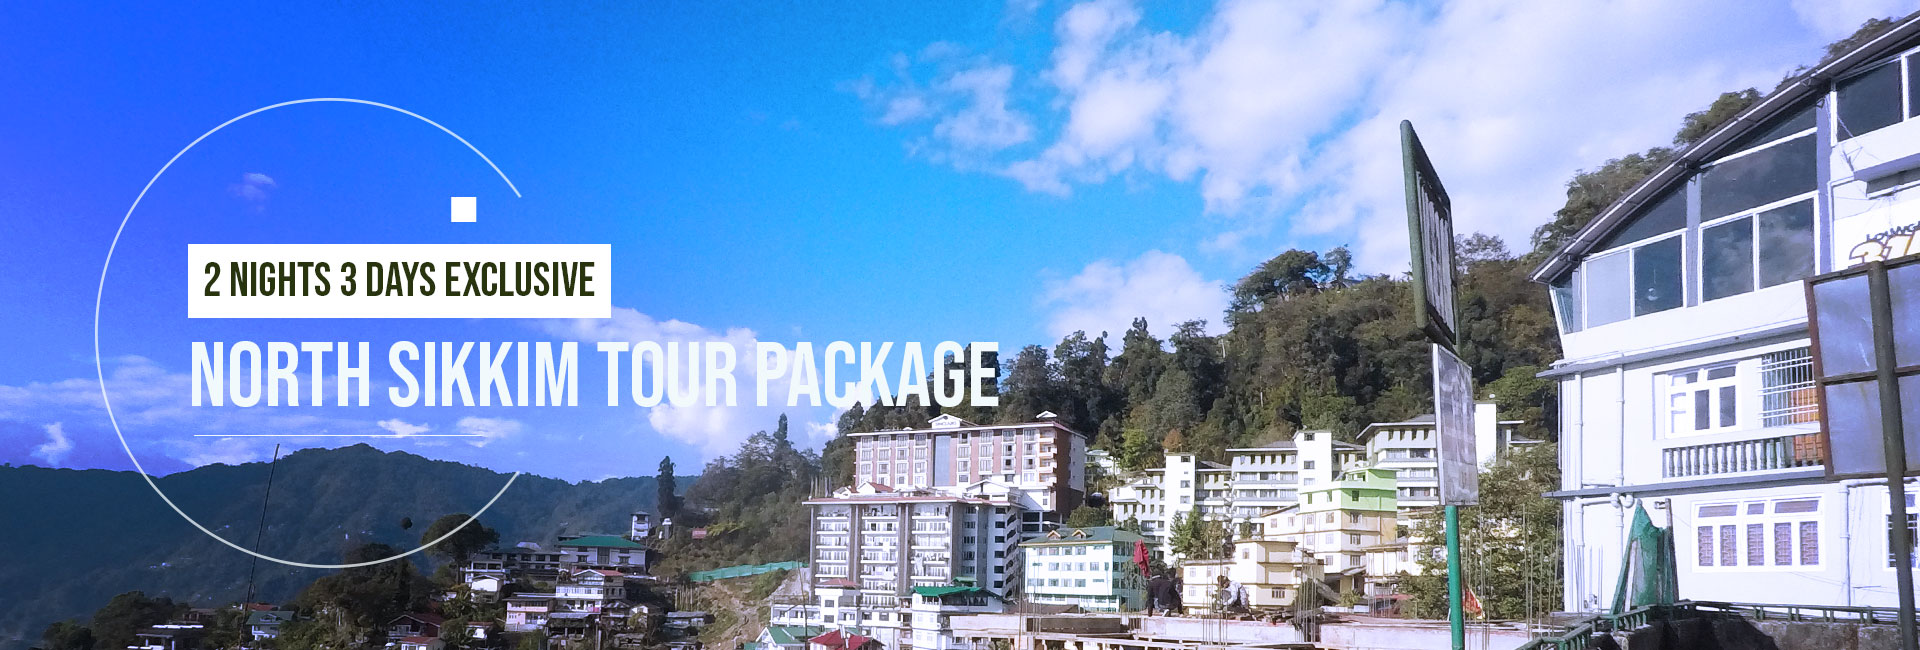 North Sikkim Tour Package for 2 Nights 3 Days - Be An Explorer